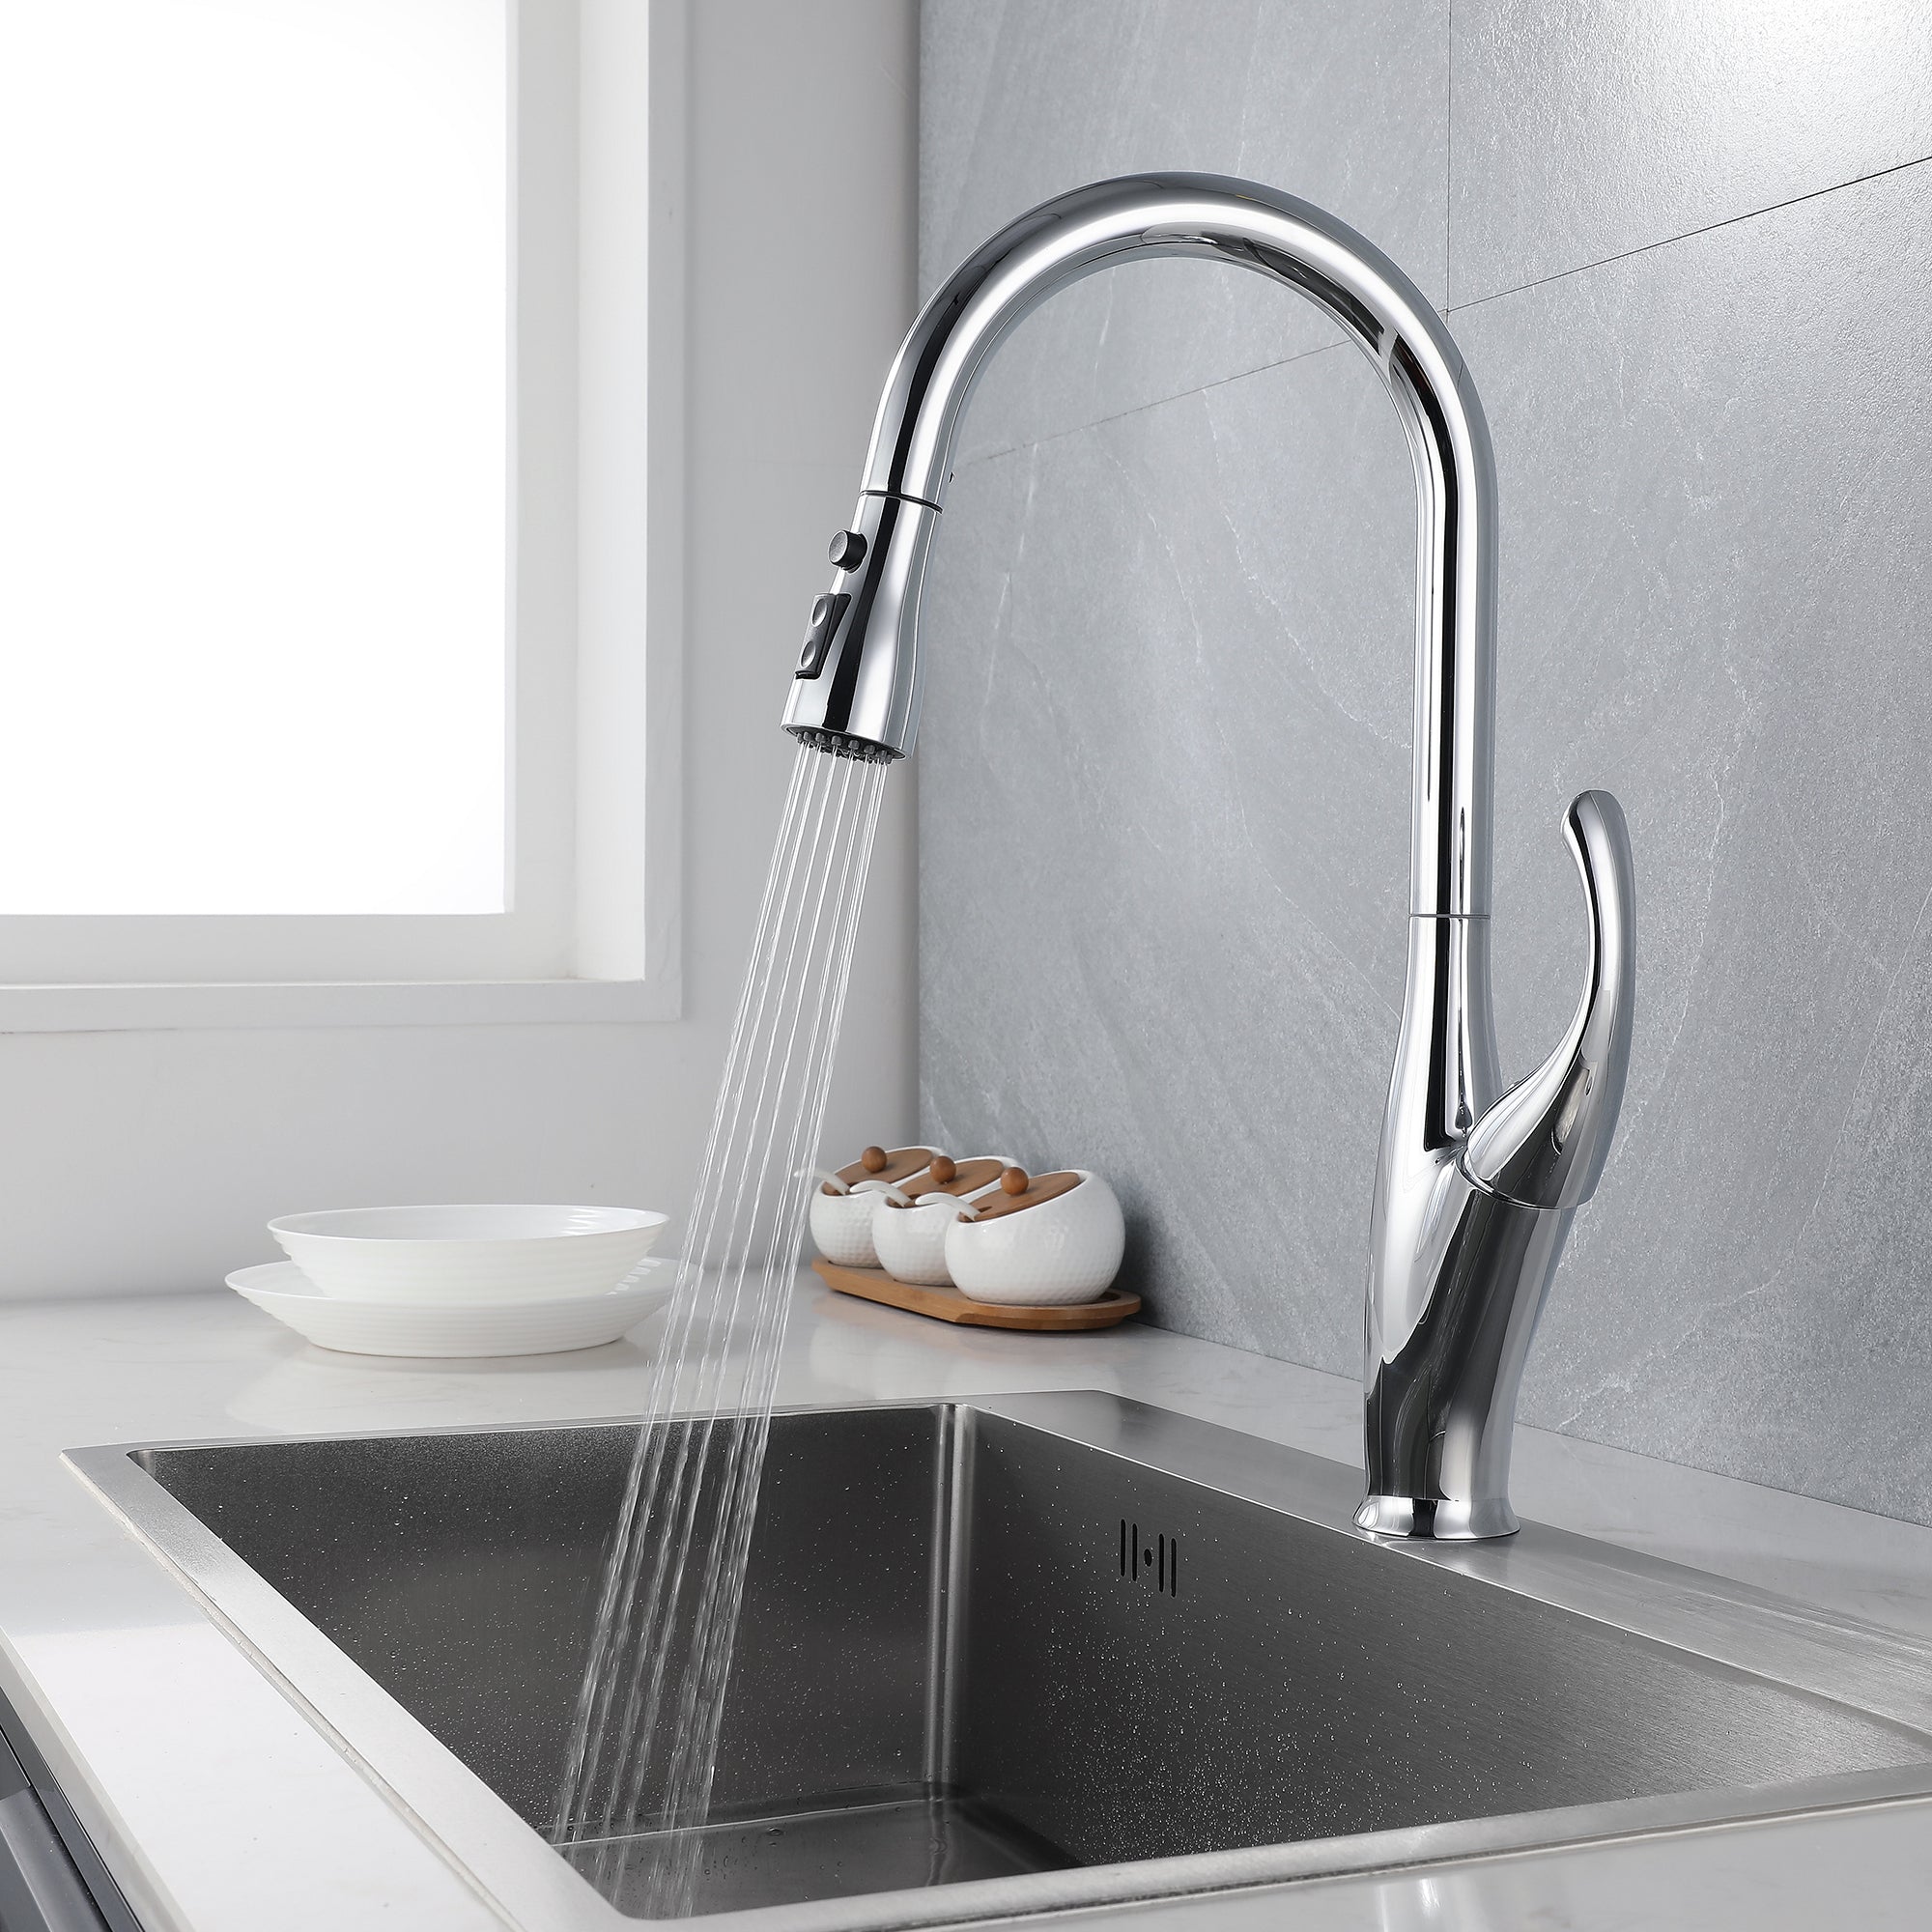 High Arc Single Handle Kitchen Sink Faucet with Pull Down Sprayer in Chrome